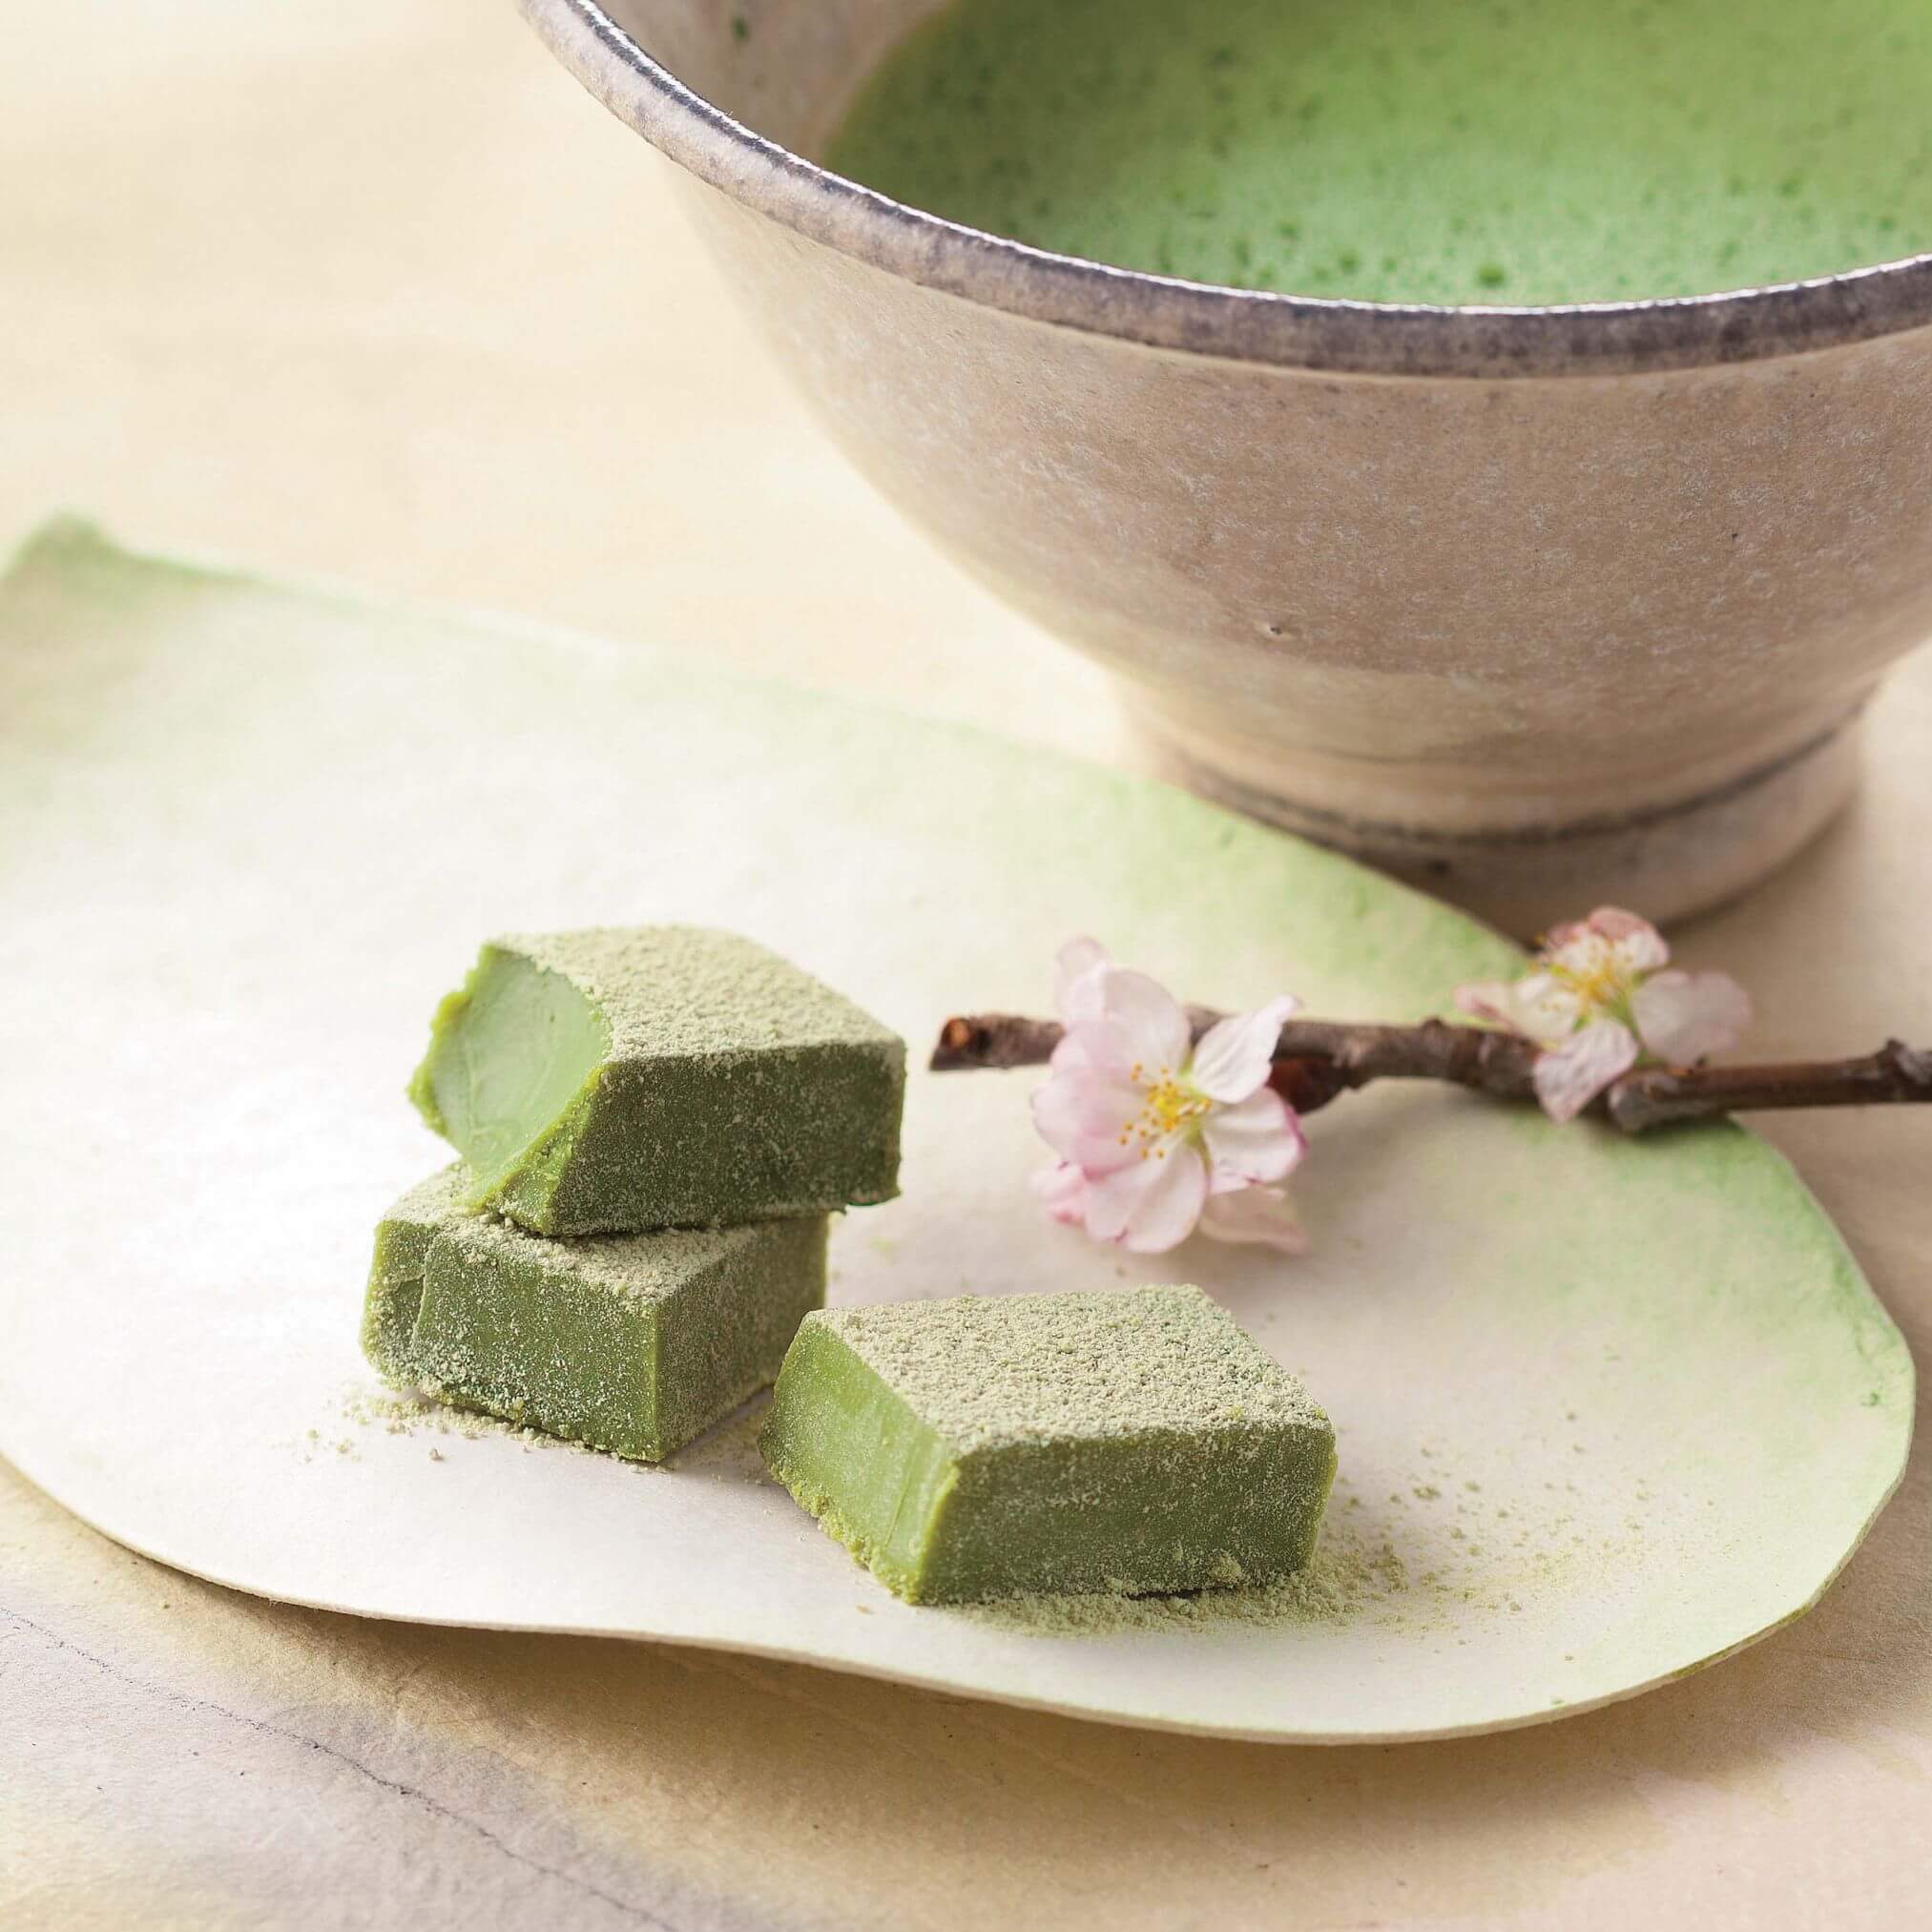 ROYCE' Chocolate - Nama Chocolate "Matcha" - Image shows green blocks of chocolates on a plate. Accents include a brown stem with pink flowers and a white tea cup filled with green tea.